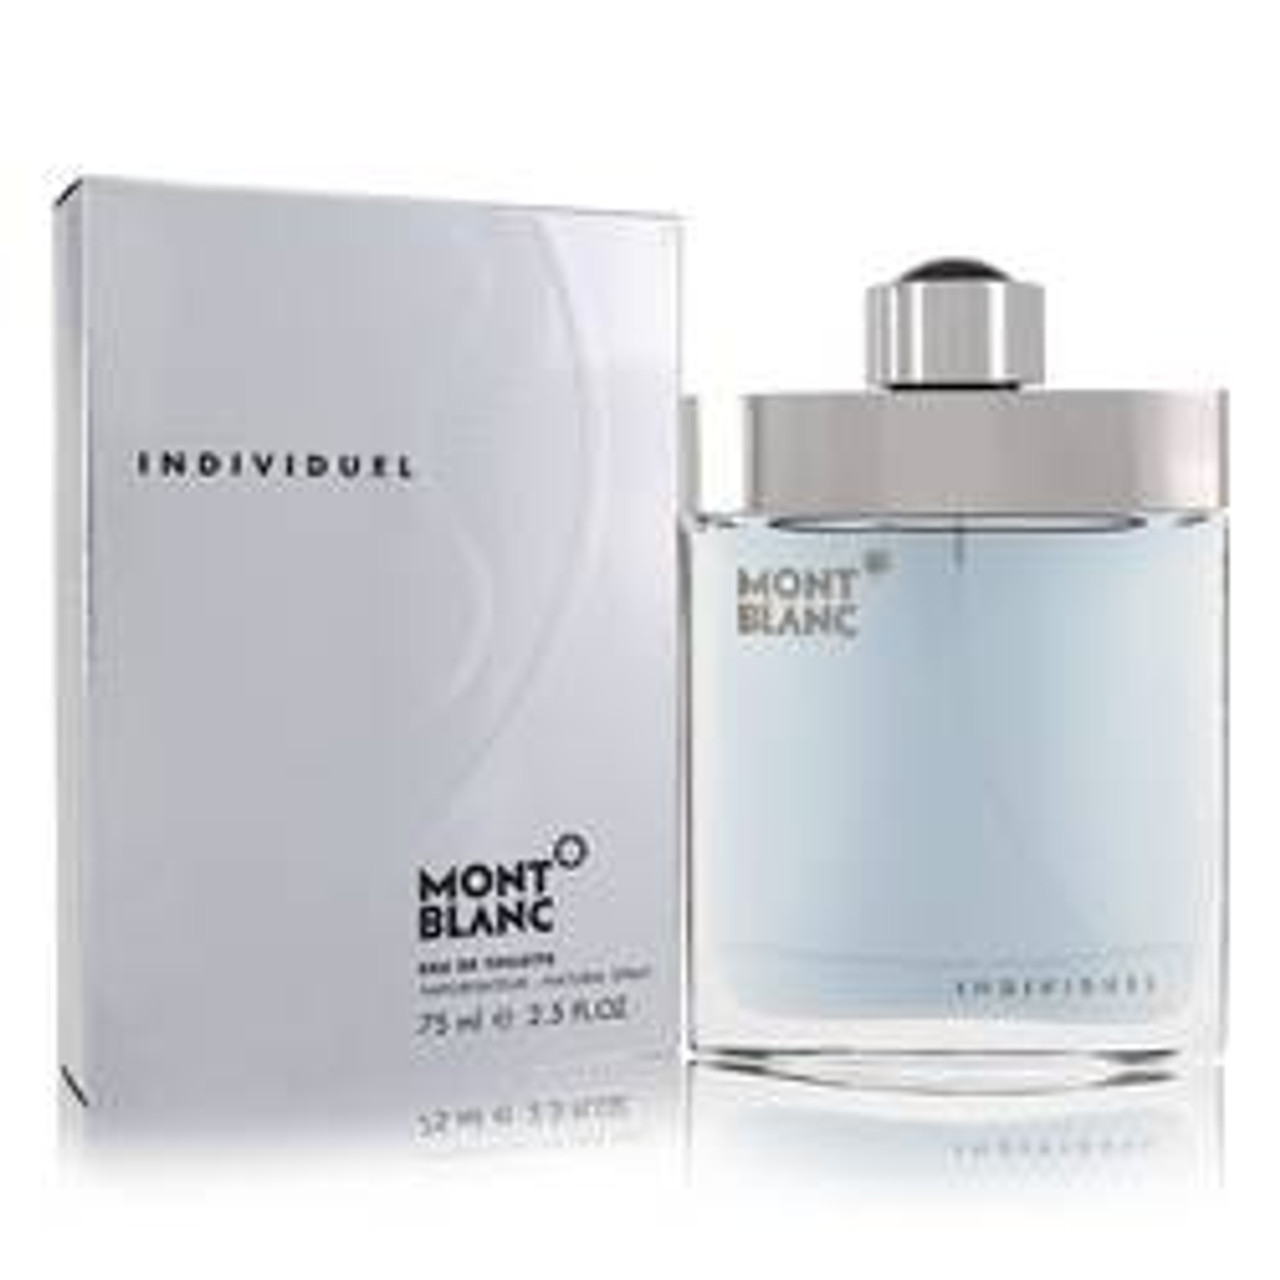 Individuelle Cologne By Mont Blanc Eau De Toilette Spray 2.5 oz for Men - [From 88.00 - Choose pk Qty ] - *Ships from Miami